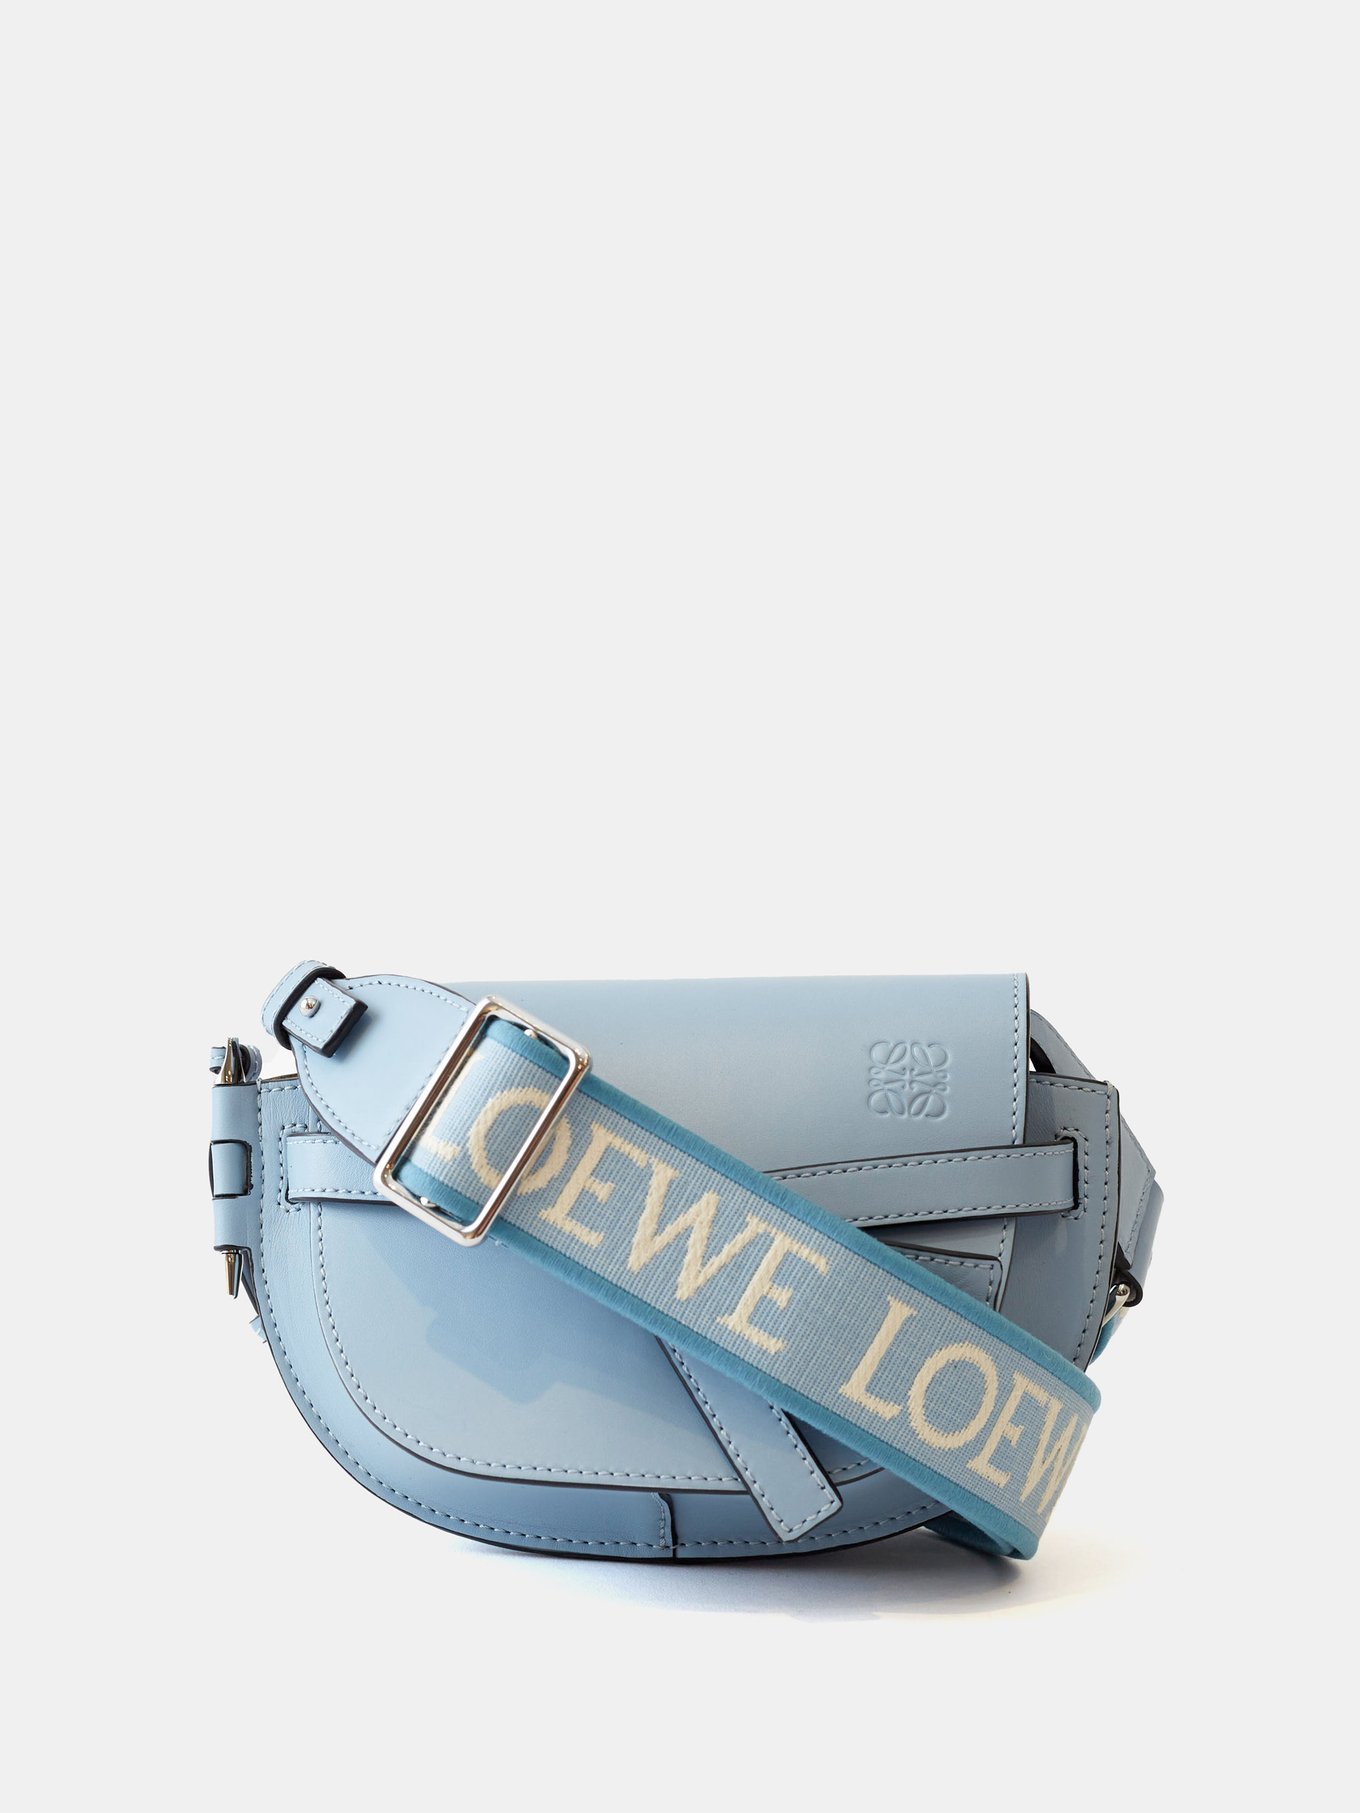 Gate leather crossbody bag Loewe Multicolour in Leather - 36166834